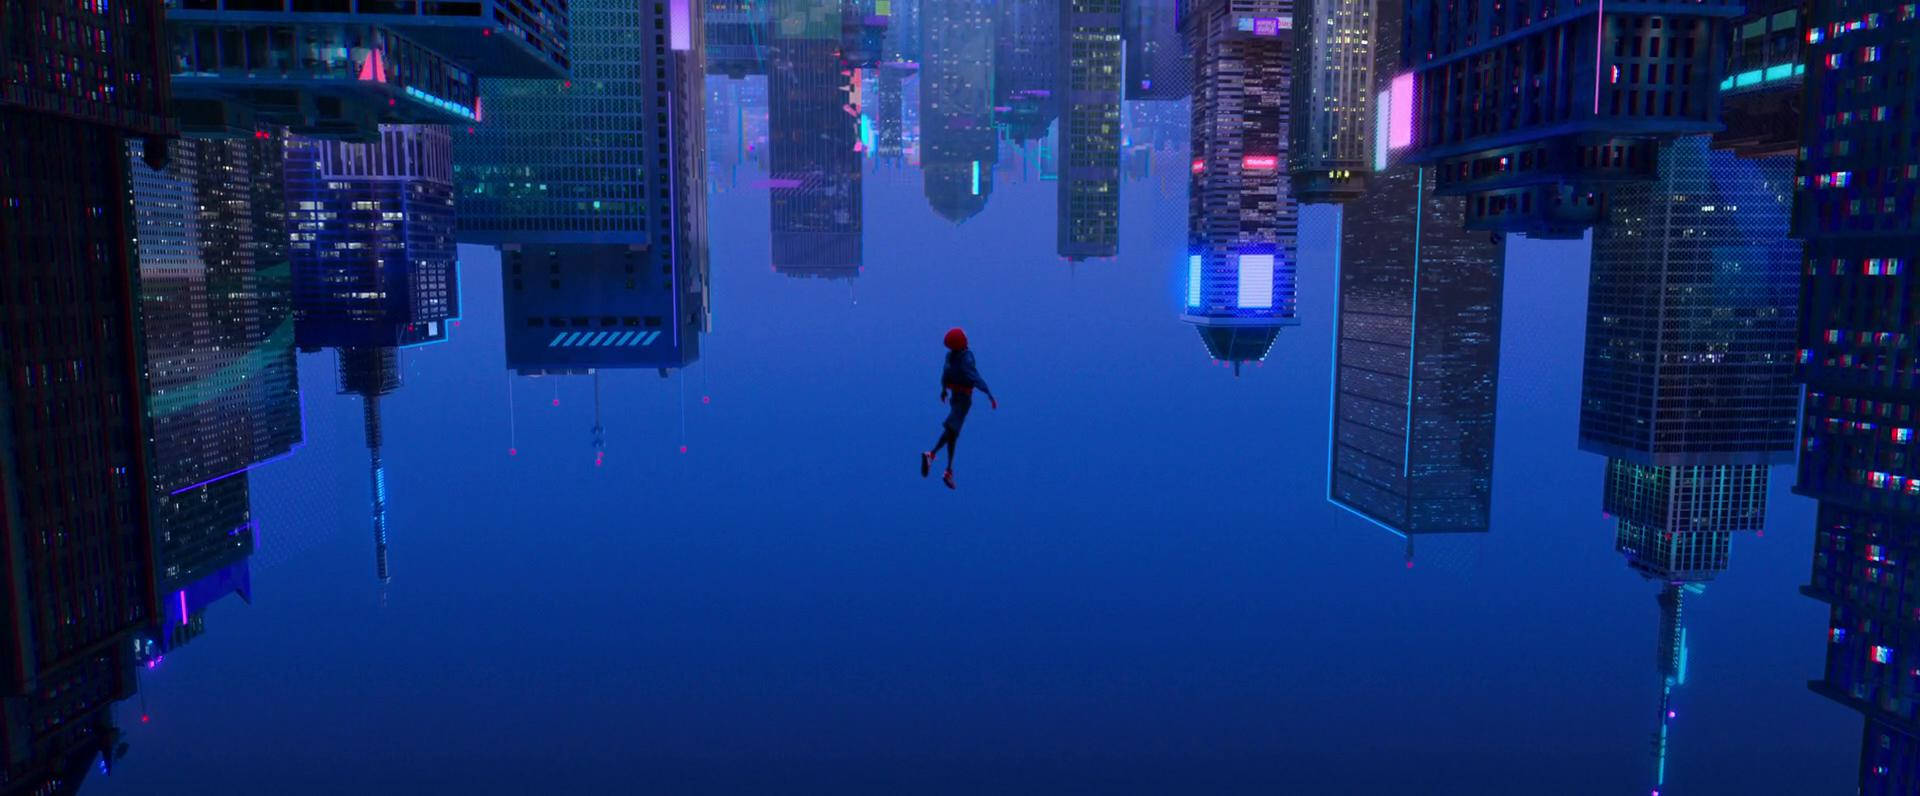 Free Spider Man Into The Spider Verse Wallpaper Downloads, [100+] Spider  Man Into The Spider Verse Wallpapers for FREE 